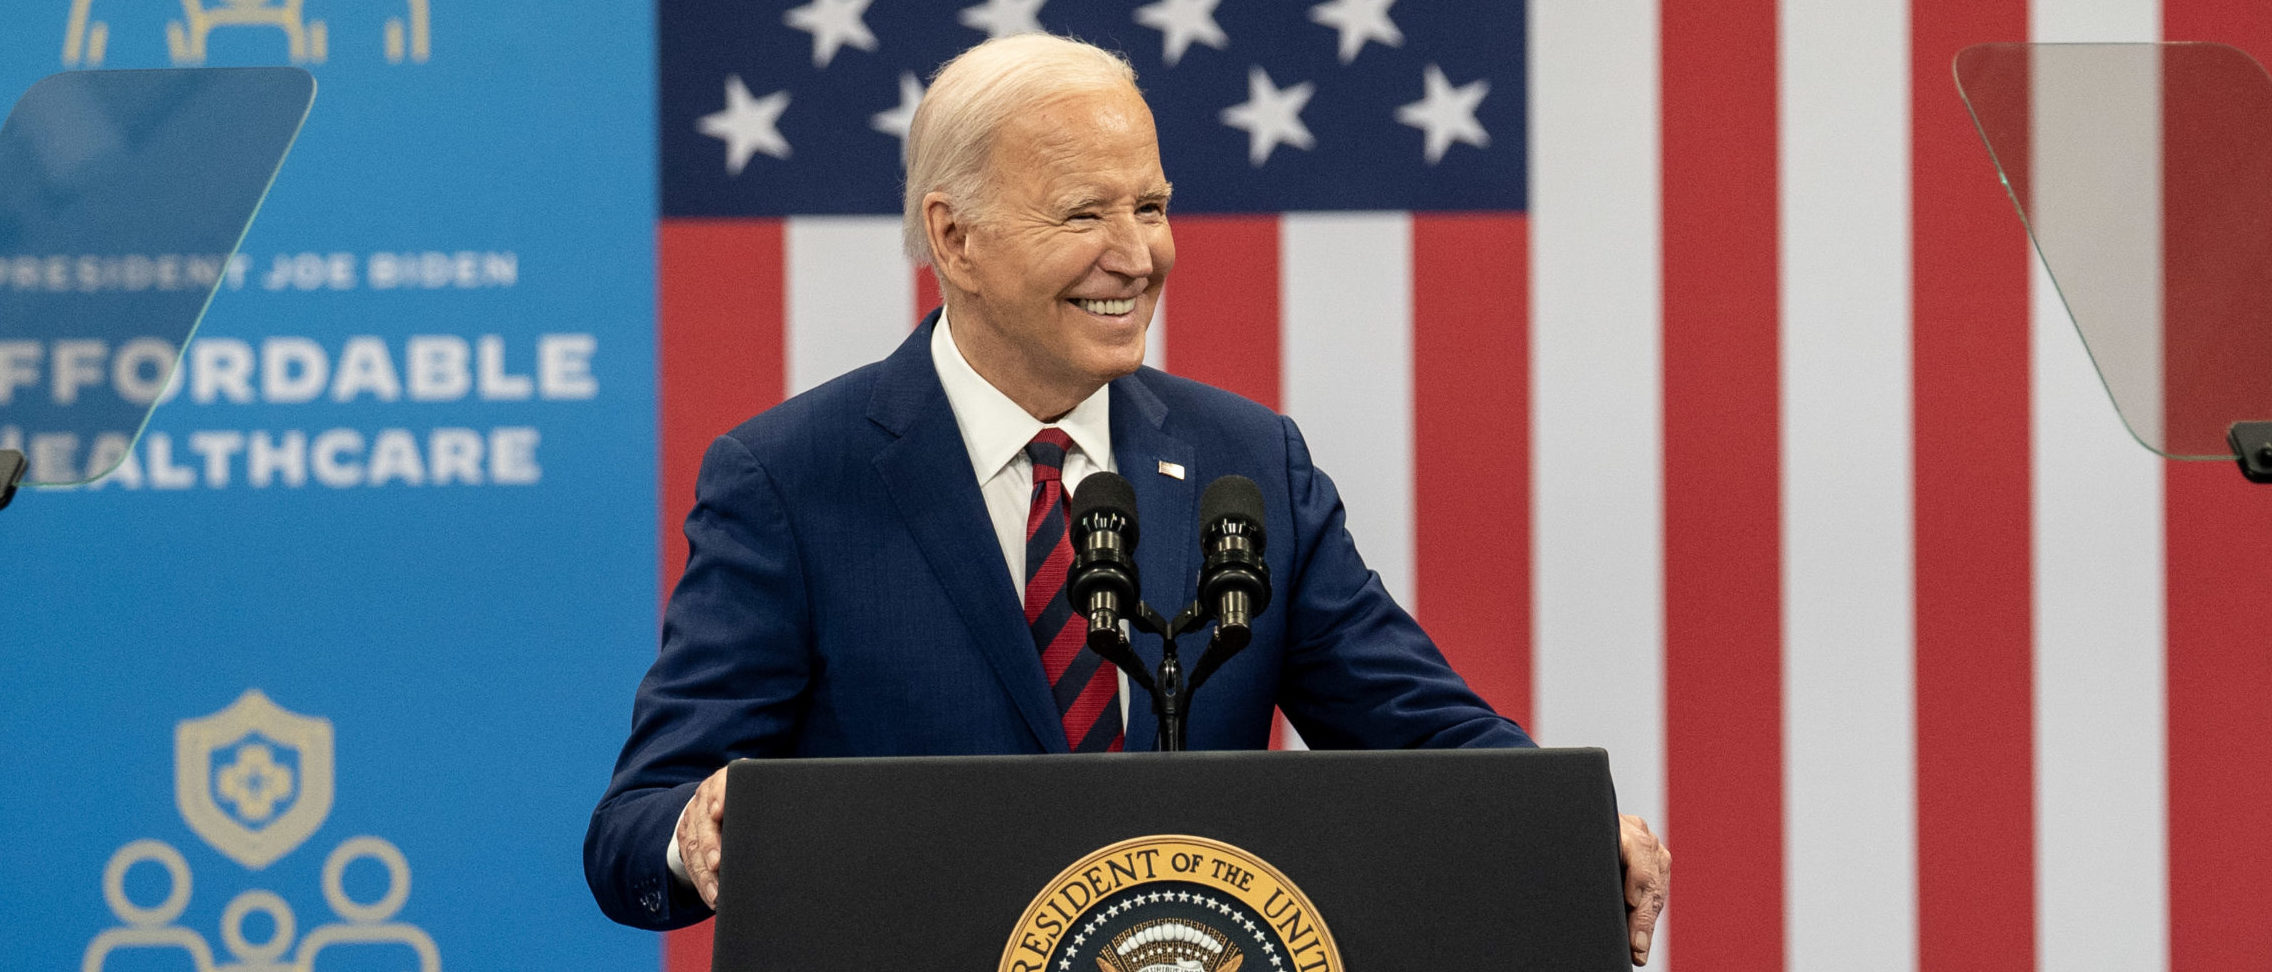 Biden Campaign Announces Fundraising Numbers That Dwarf Trump’s |   	  The Daily Caller